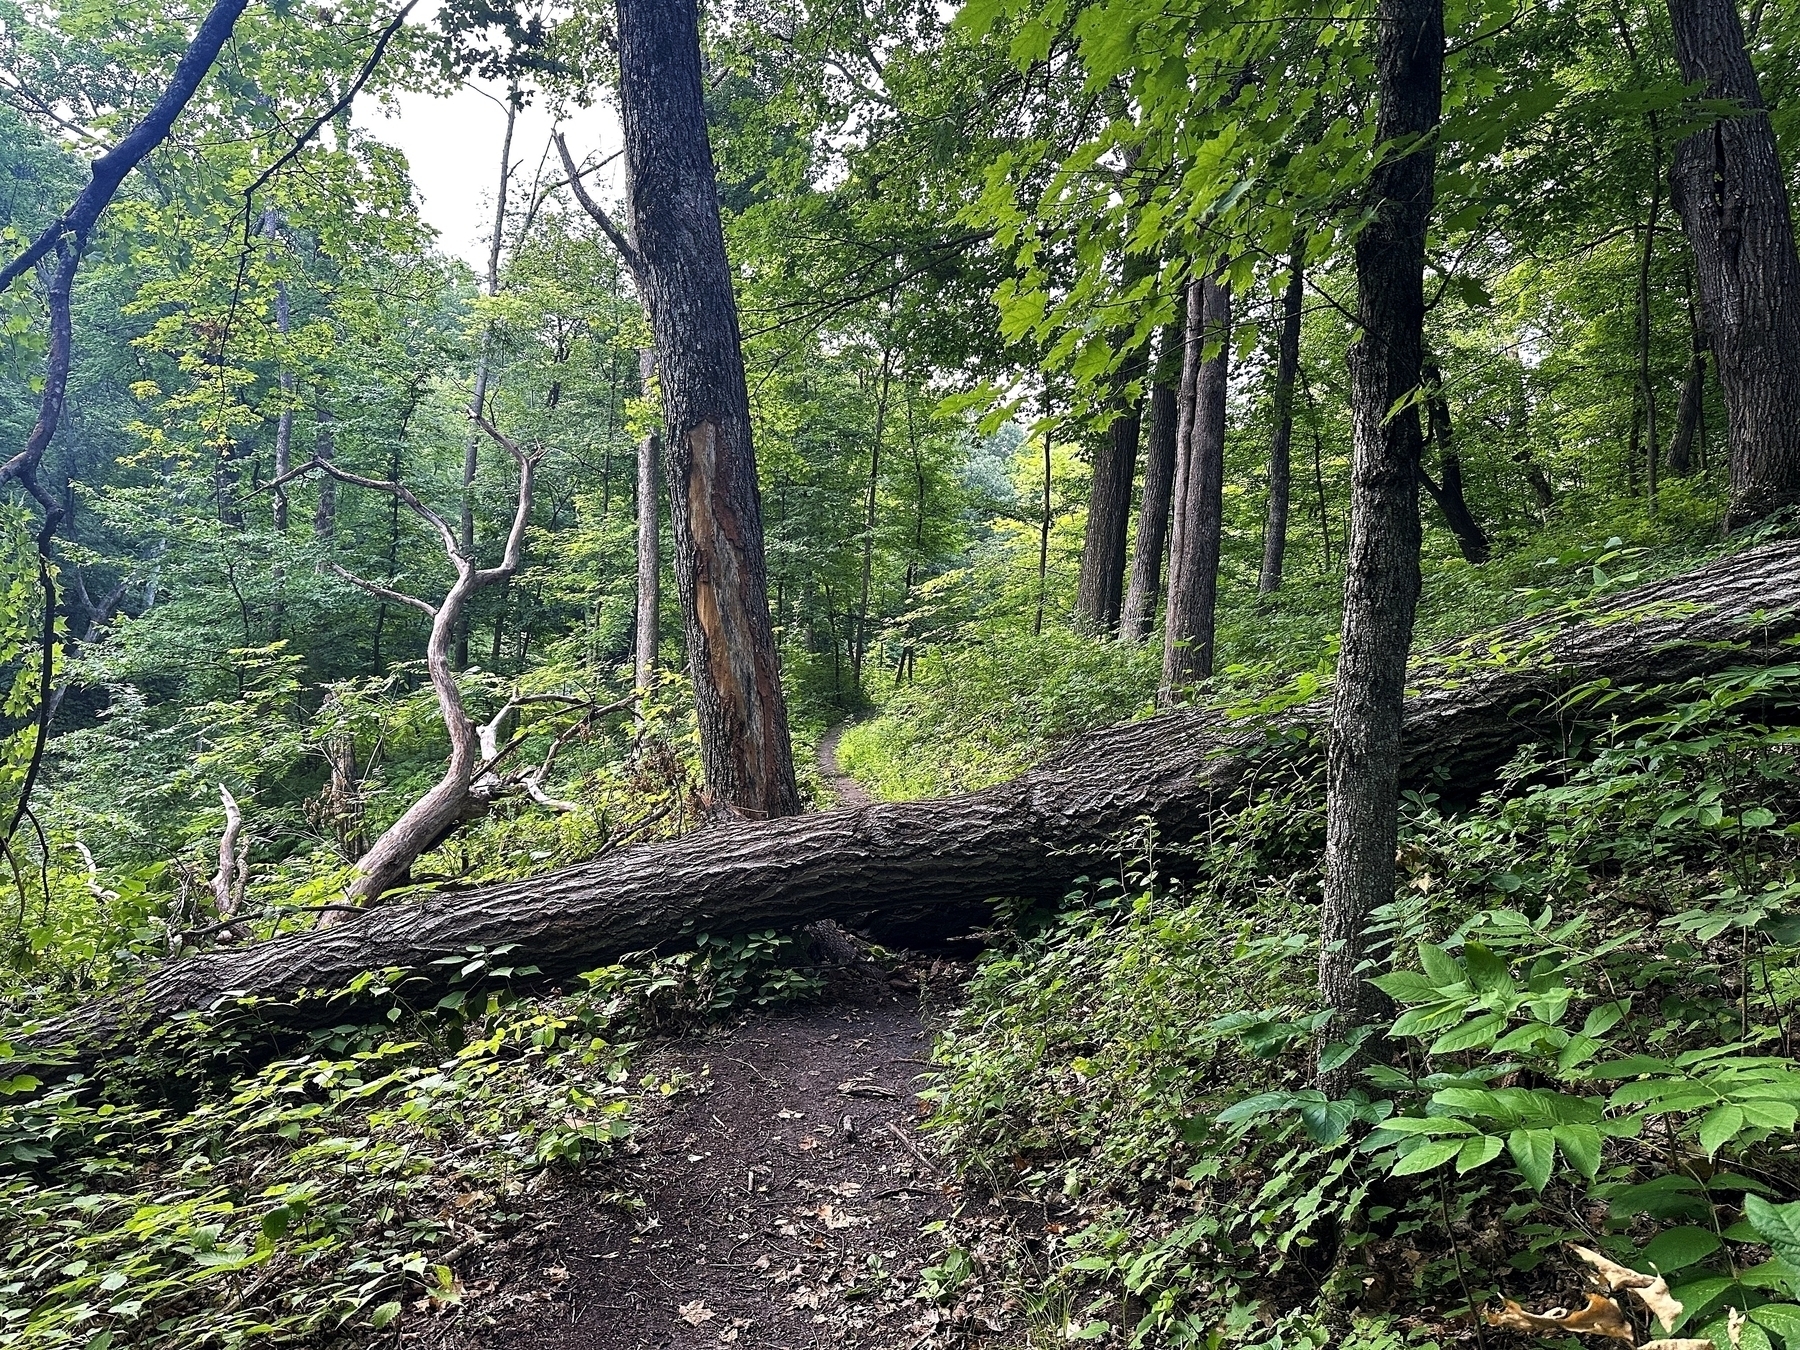 A large tree has fallen across a narrow dirt path, surrounded by dense, green forest foliage.